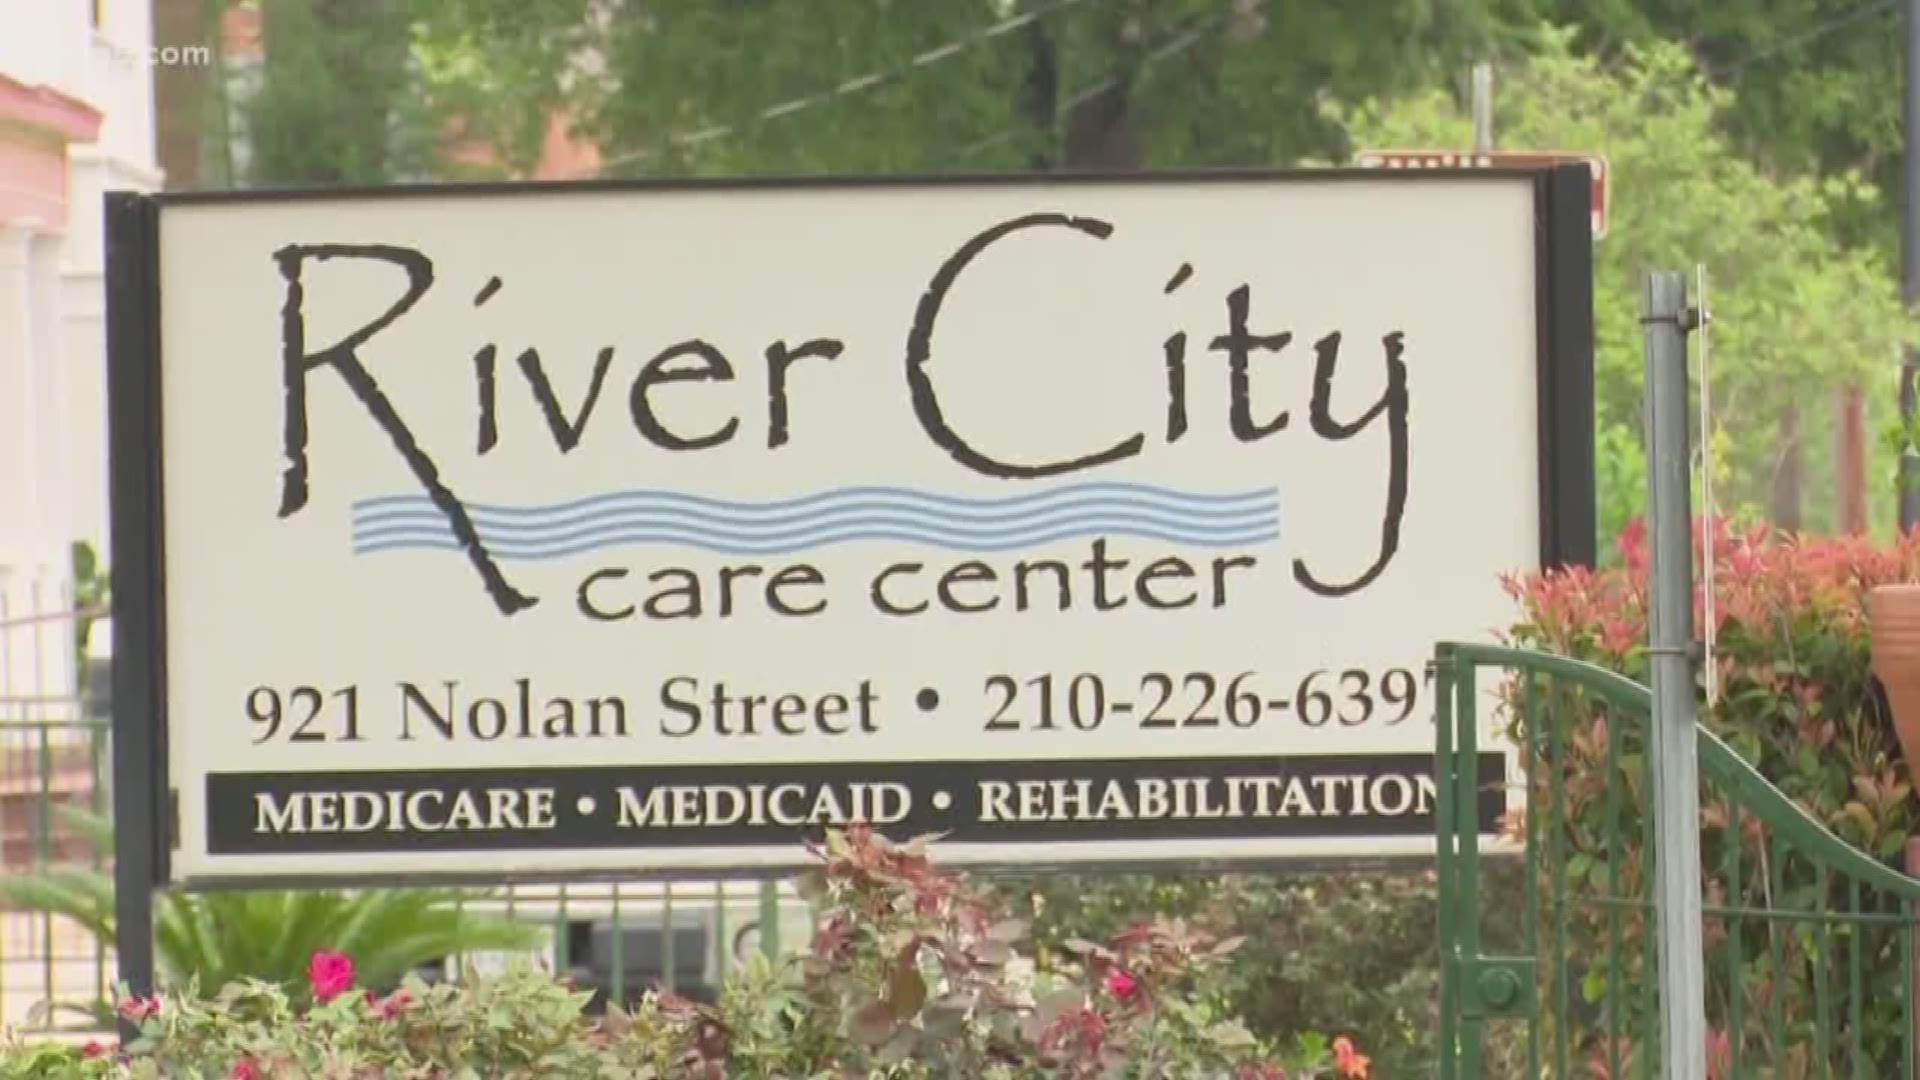 Local government officials say residents were upset and confused, seeking to understand why the patients were taken to River City Care Center.